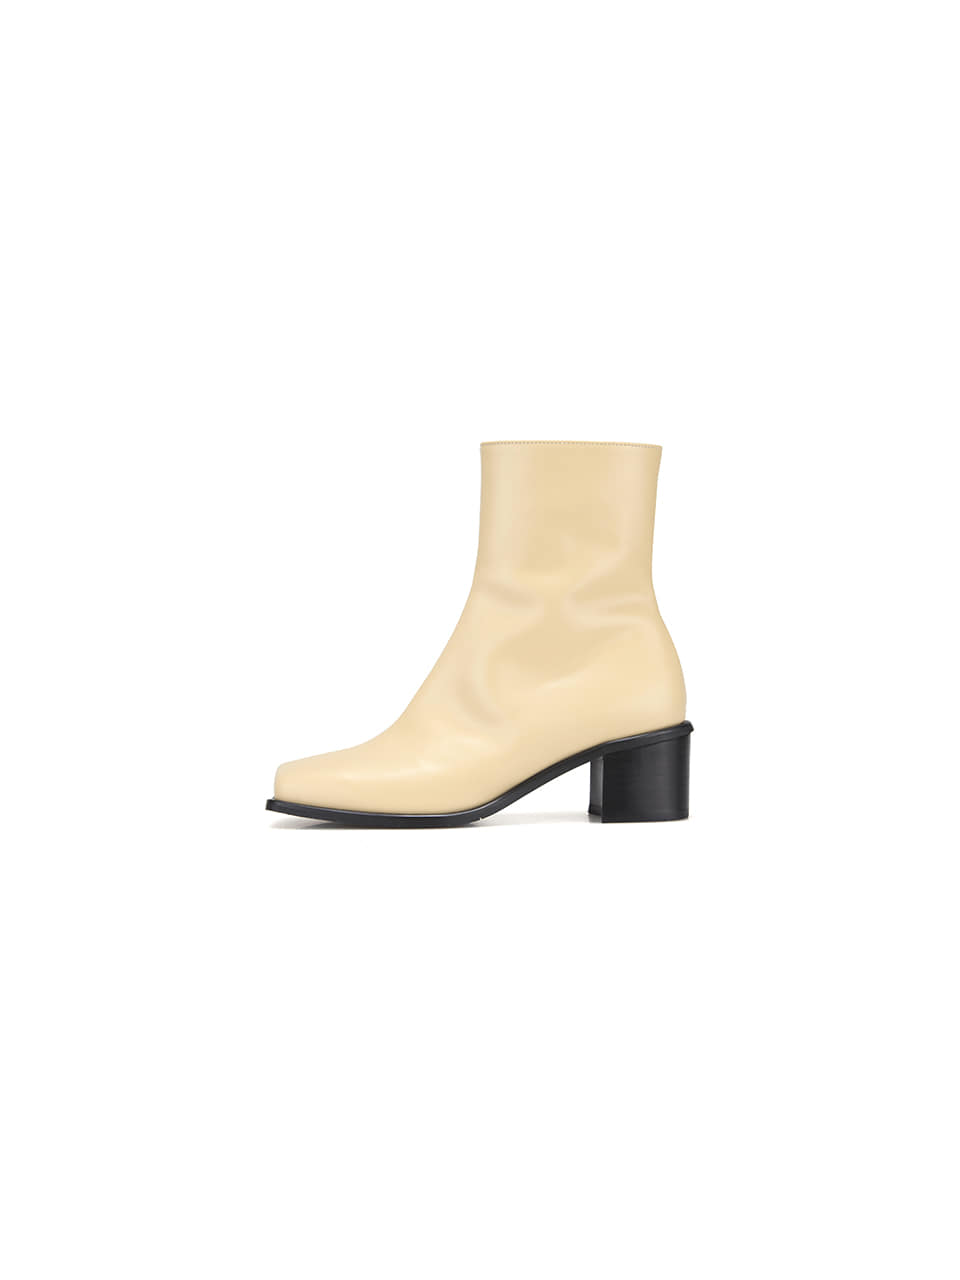 Oma Ankle Boots_21545_beige